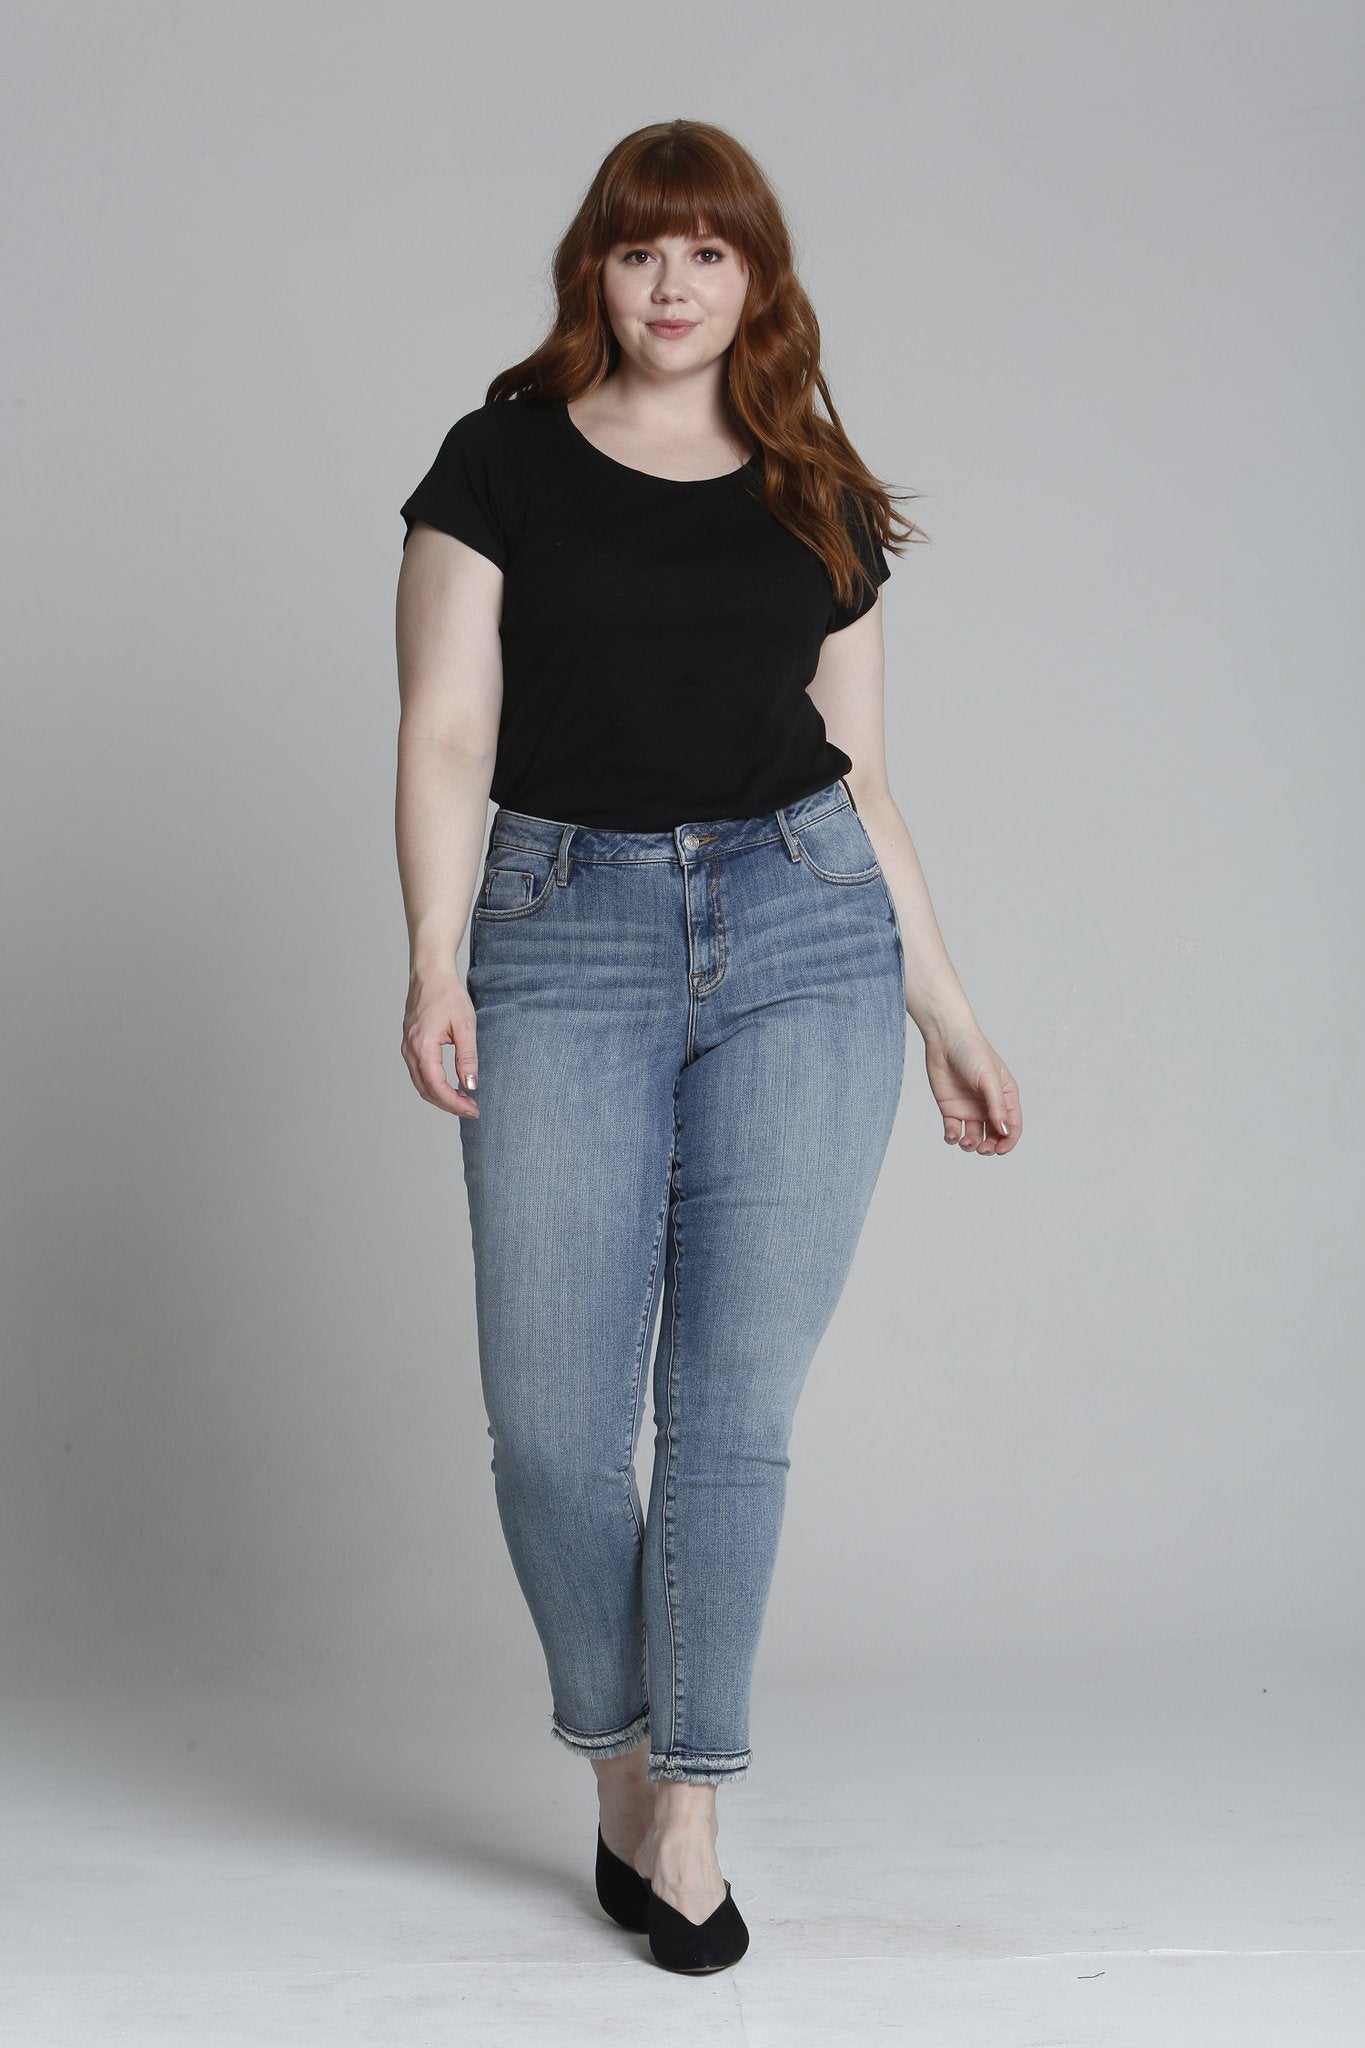 Load image into Gallery viewer, Jagger Classic Skinny [Plus Size] - Medium
